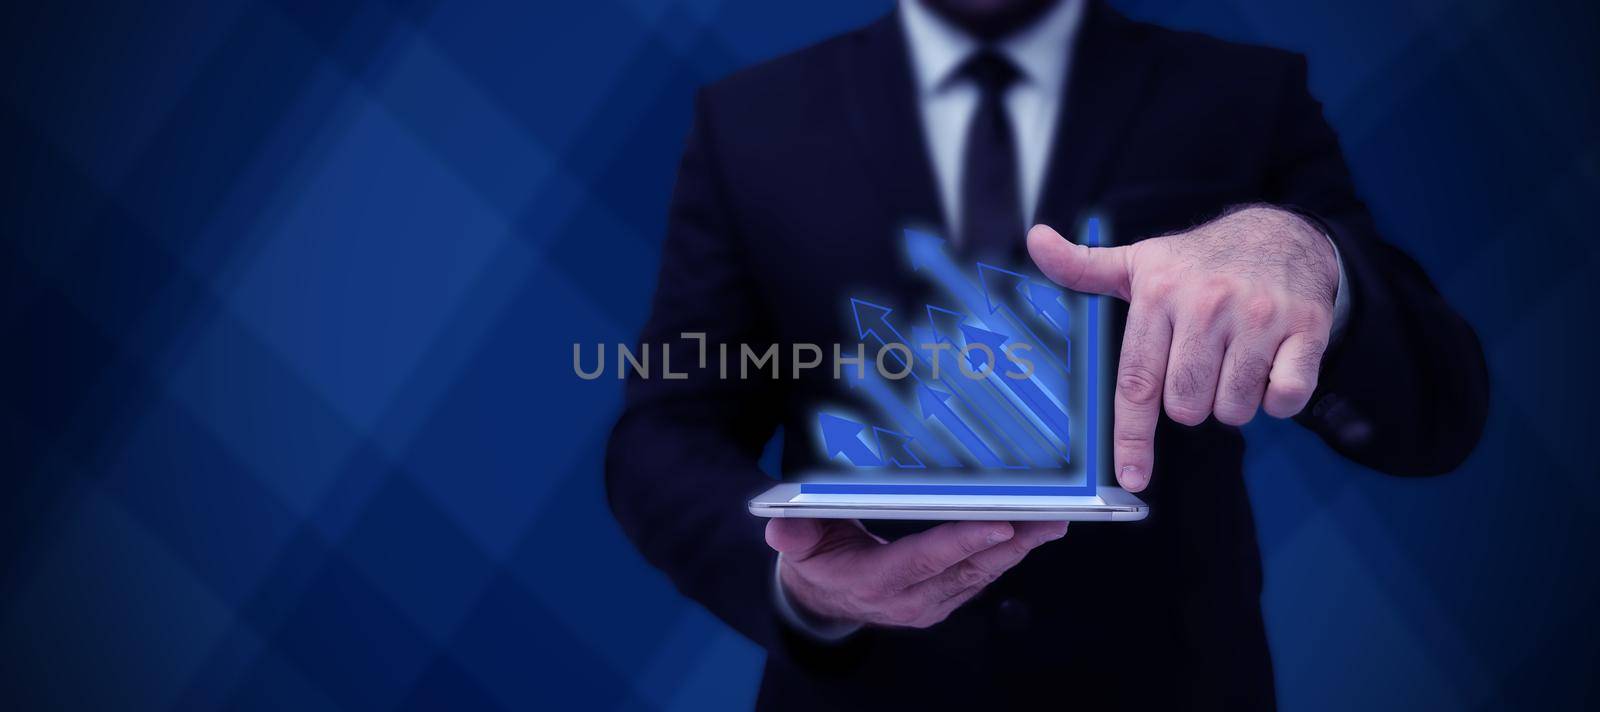 Businessman in suit holding tablet symbolizing successful teamwork accomplishing newest project plans. Man carrying electrical device representing combined effort management. by nialowwa